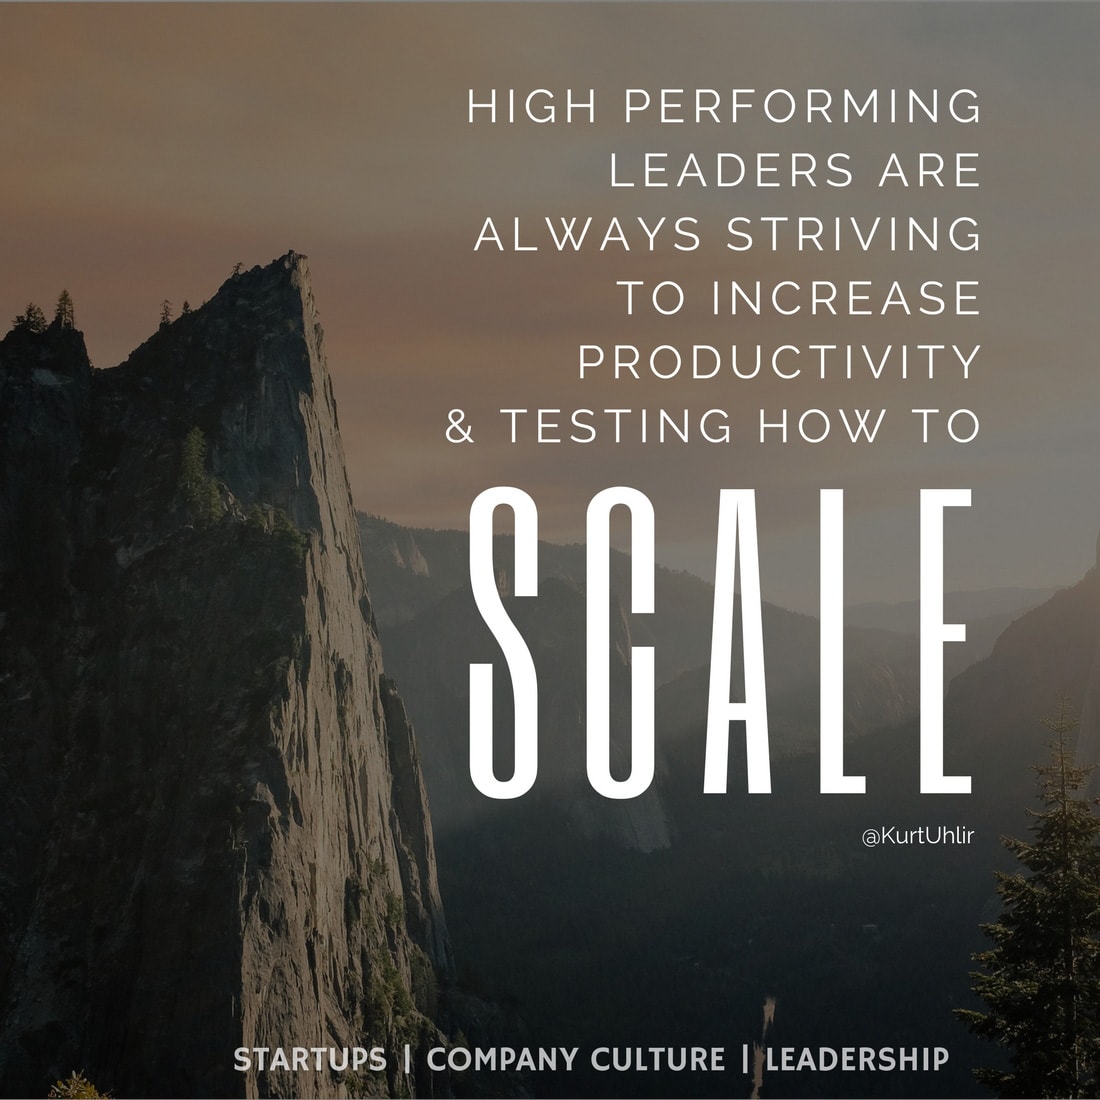 High performing leaders are always striving to increase productivity & testing how to scale - Kurt Uhlir quote | Leadership | Motivation | Entrepreneurship